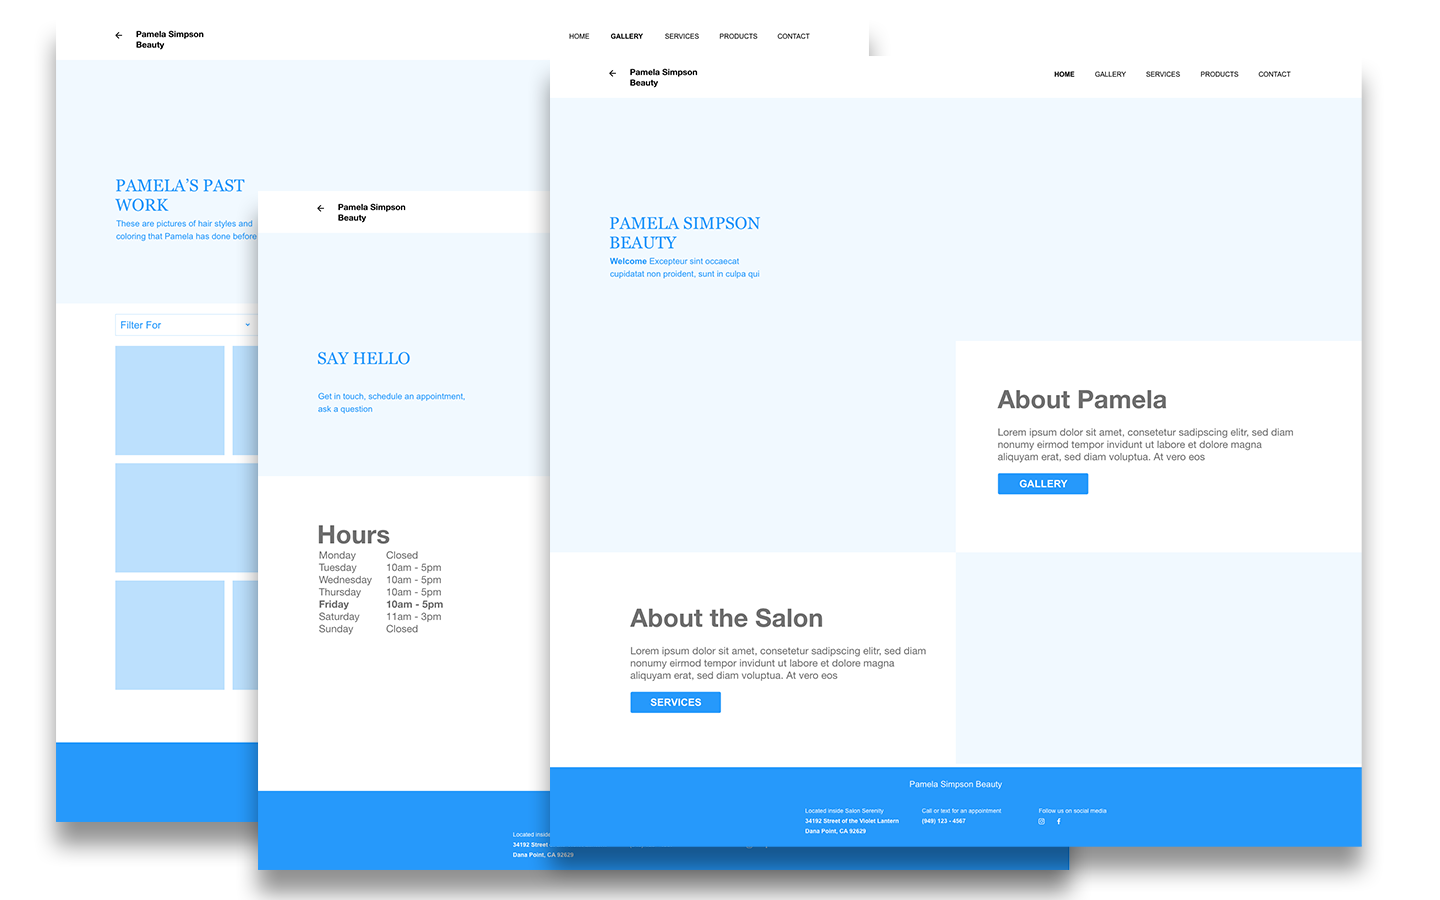 The desktop wireframes that I created for this project